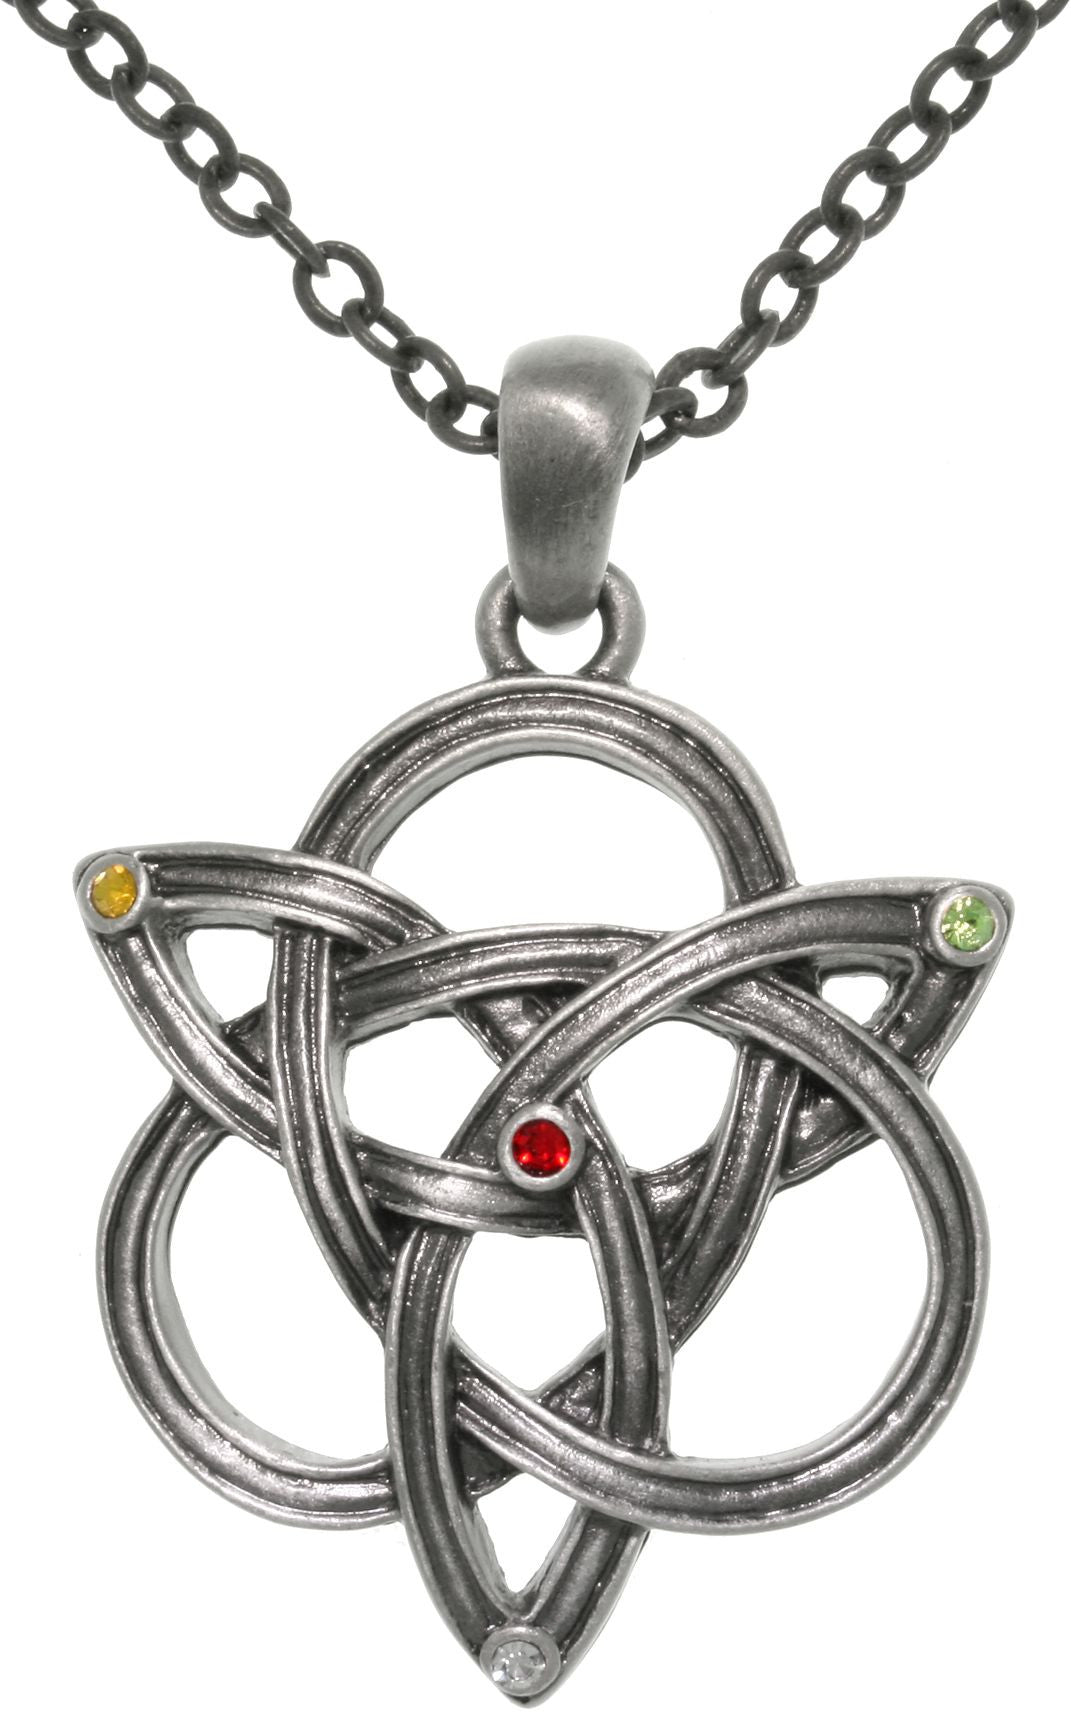 Jewelry Trends Pewter Celtic Knot Trinity Pendant on a 24 Inch Chain Necklace